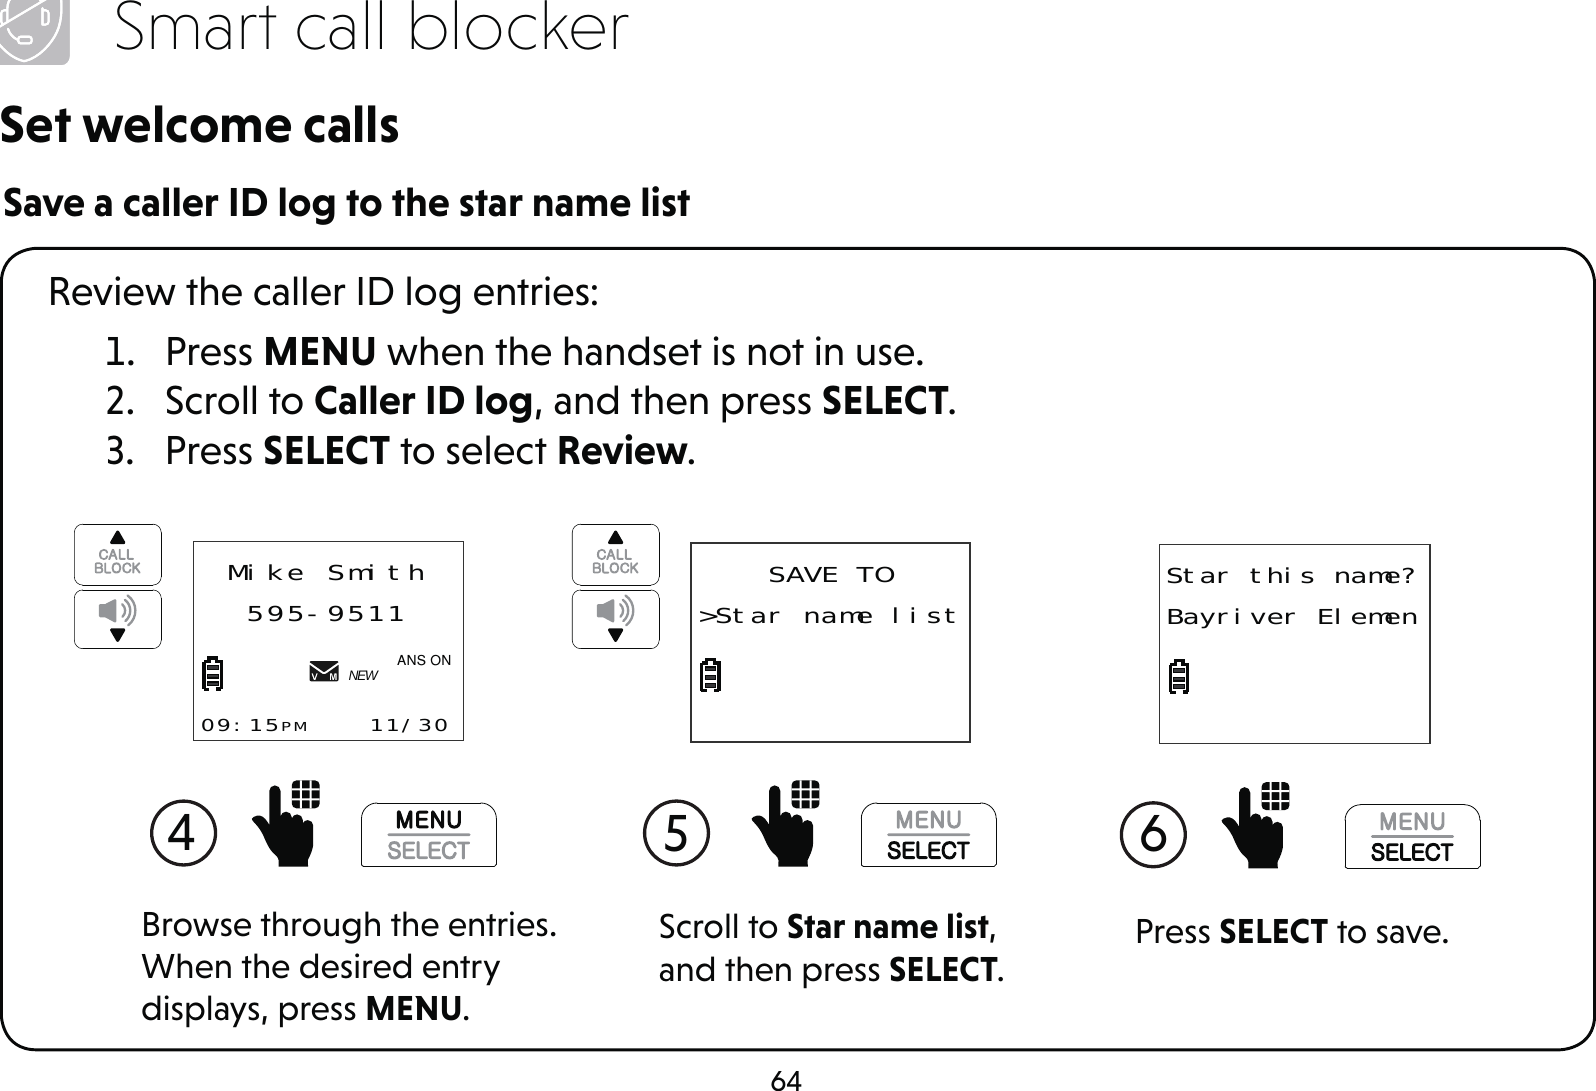 64Smart call blockerSet welcome callsSave a caller ID log to the star name list1. Press MENU when the handset is not in use.2. Scroll to Caller ID log, and then press SELECT.3. Press SELECT to select Review.Review the caller ID log entries:Scroll to Star name list, and then press SELECT.5 SAVE TO&gt;Star name list4 Mike Smith595-951109:15PM    11/30NEW$1621Browse through the entries. When the desired entry displays, press MENU.Press SELECT to save.6 Star this name?Bayriver Elemen